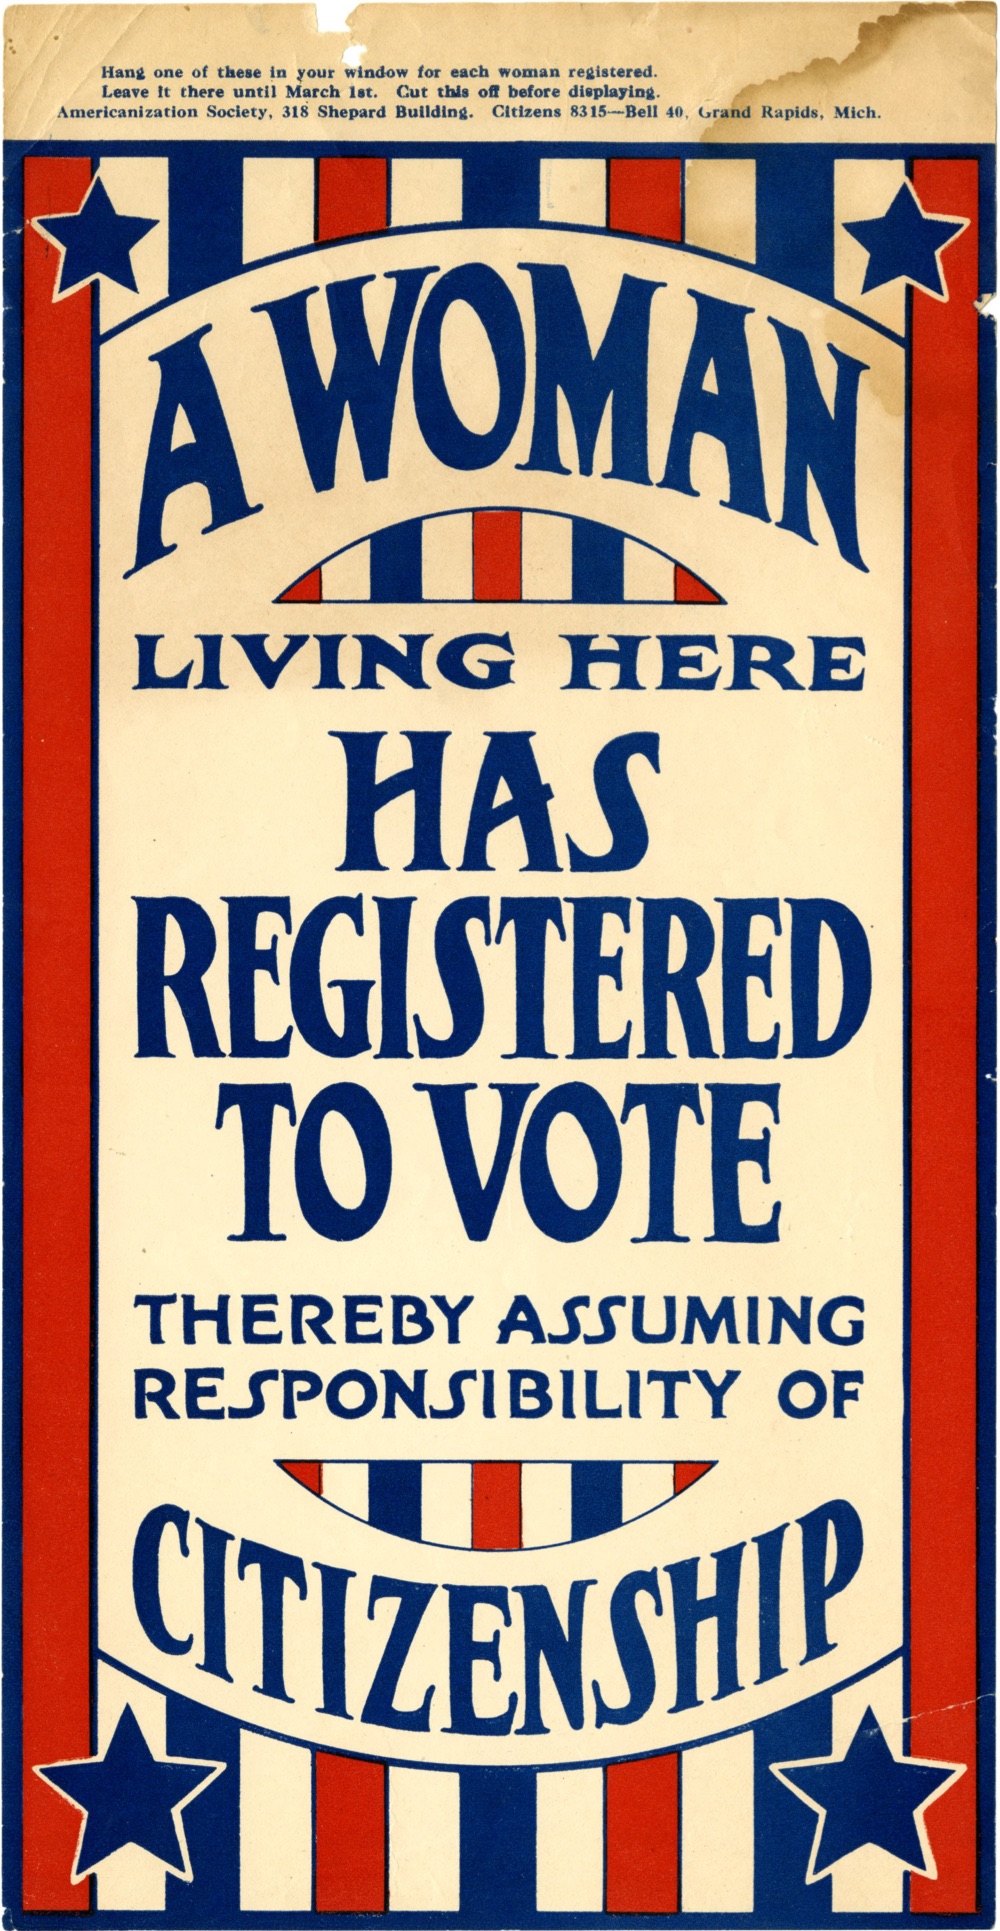 an old poster that says 'A woman here has registered to vote thereby assuming responsibility of citizenship'